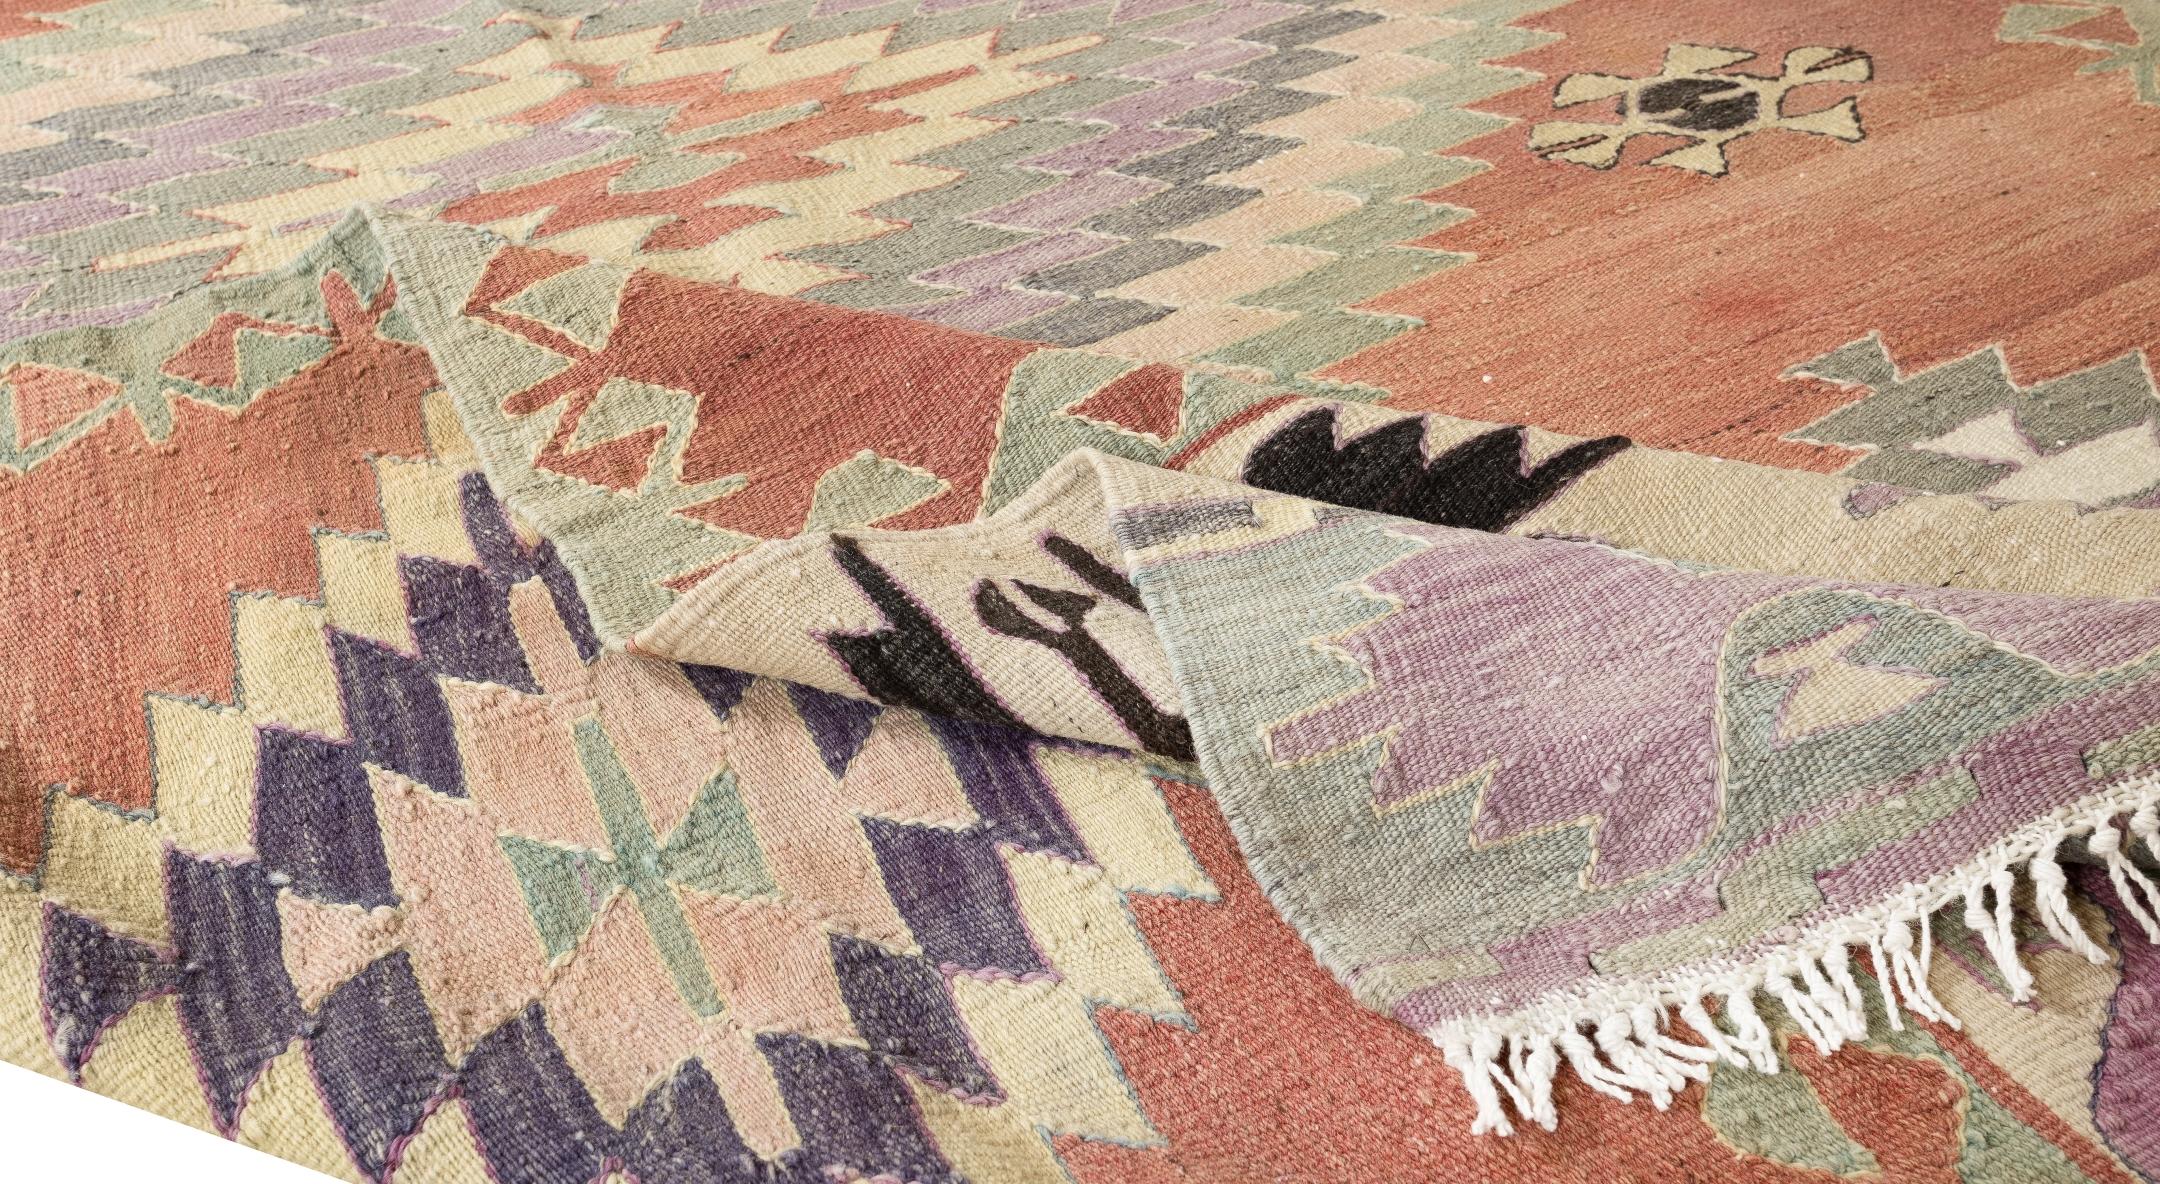 This authentic hand-woven rug made to be used by the villagers in Central Anatolia. 100% organic wool. Good condition and cleaned professionally.
Ideal for both residential and commercial interiors. 
Size: 4.7x8.7 Ft.
We can supply a suitable